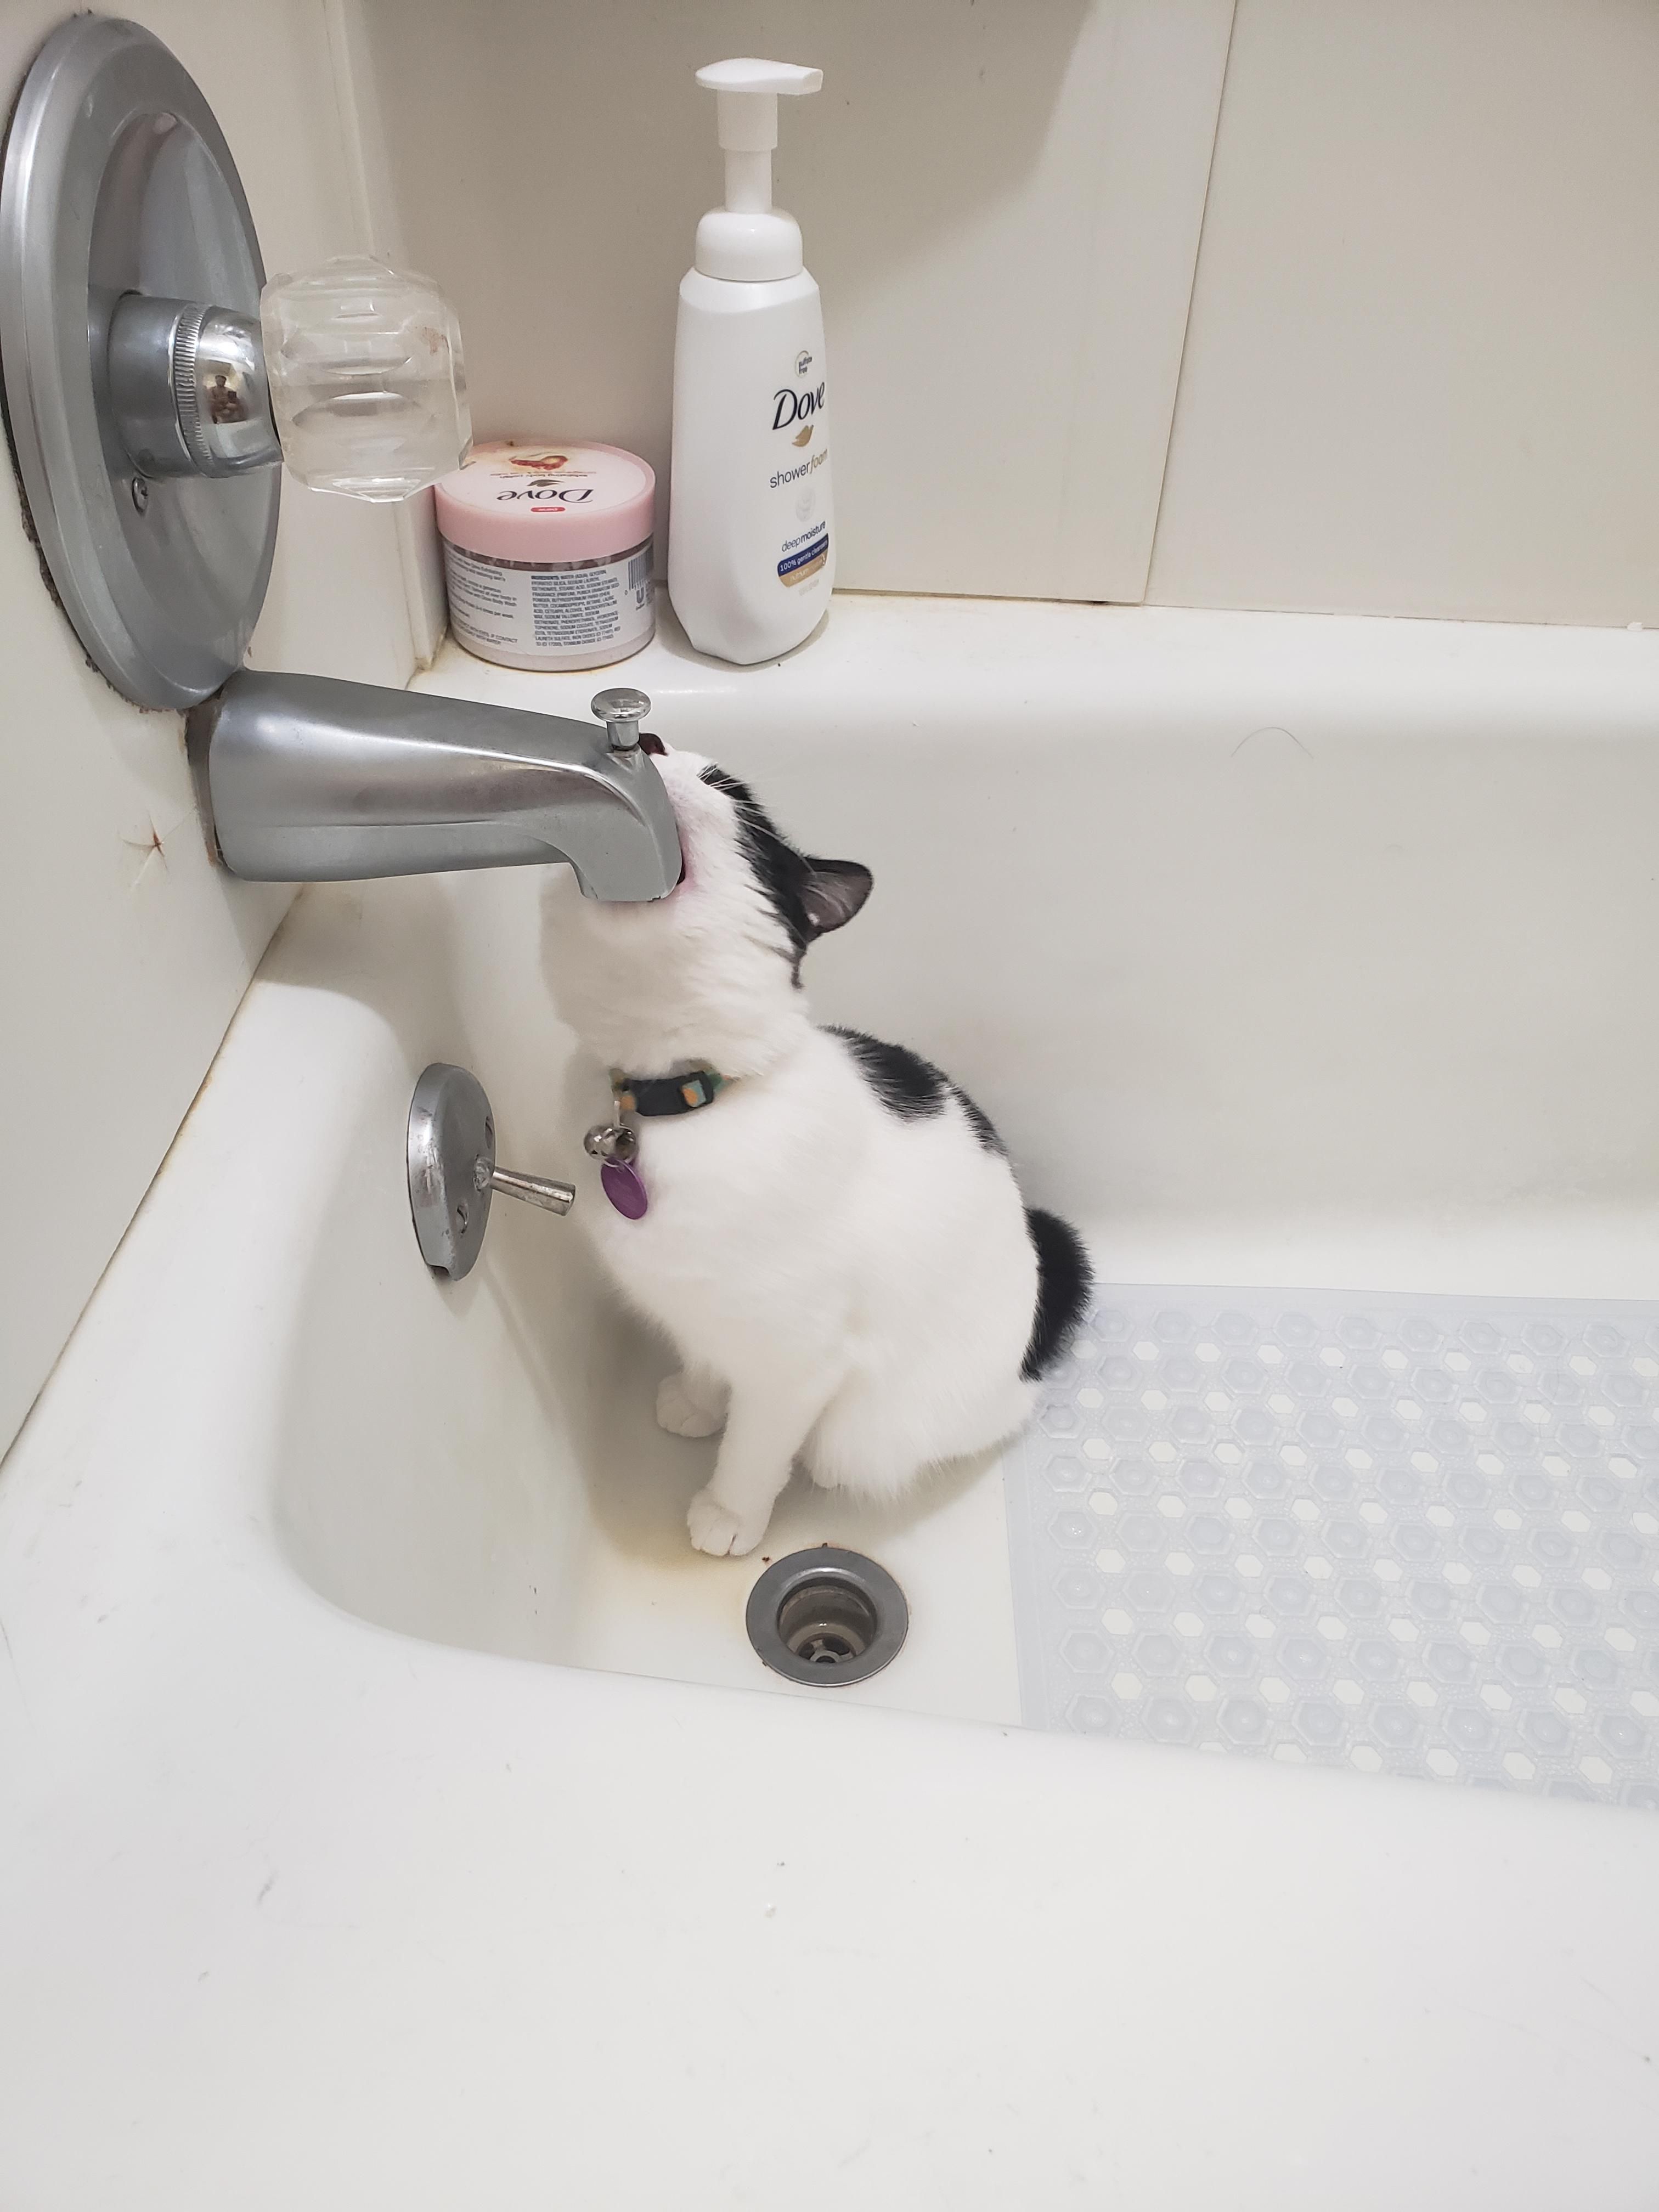 Sometimes my cat tries to deep throat the shower faucet